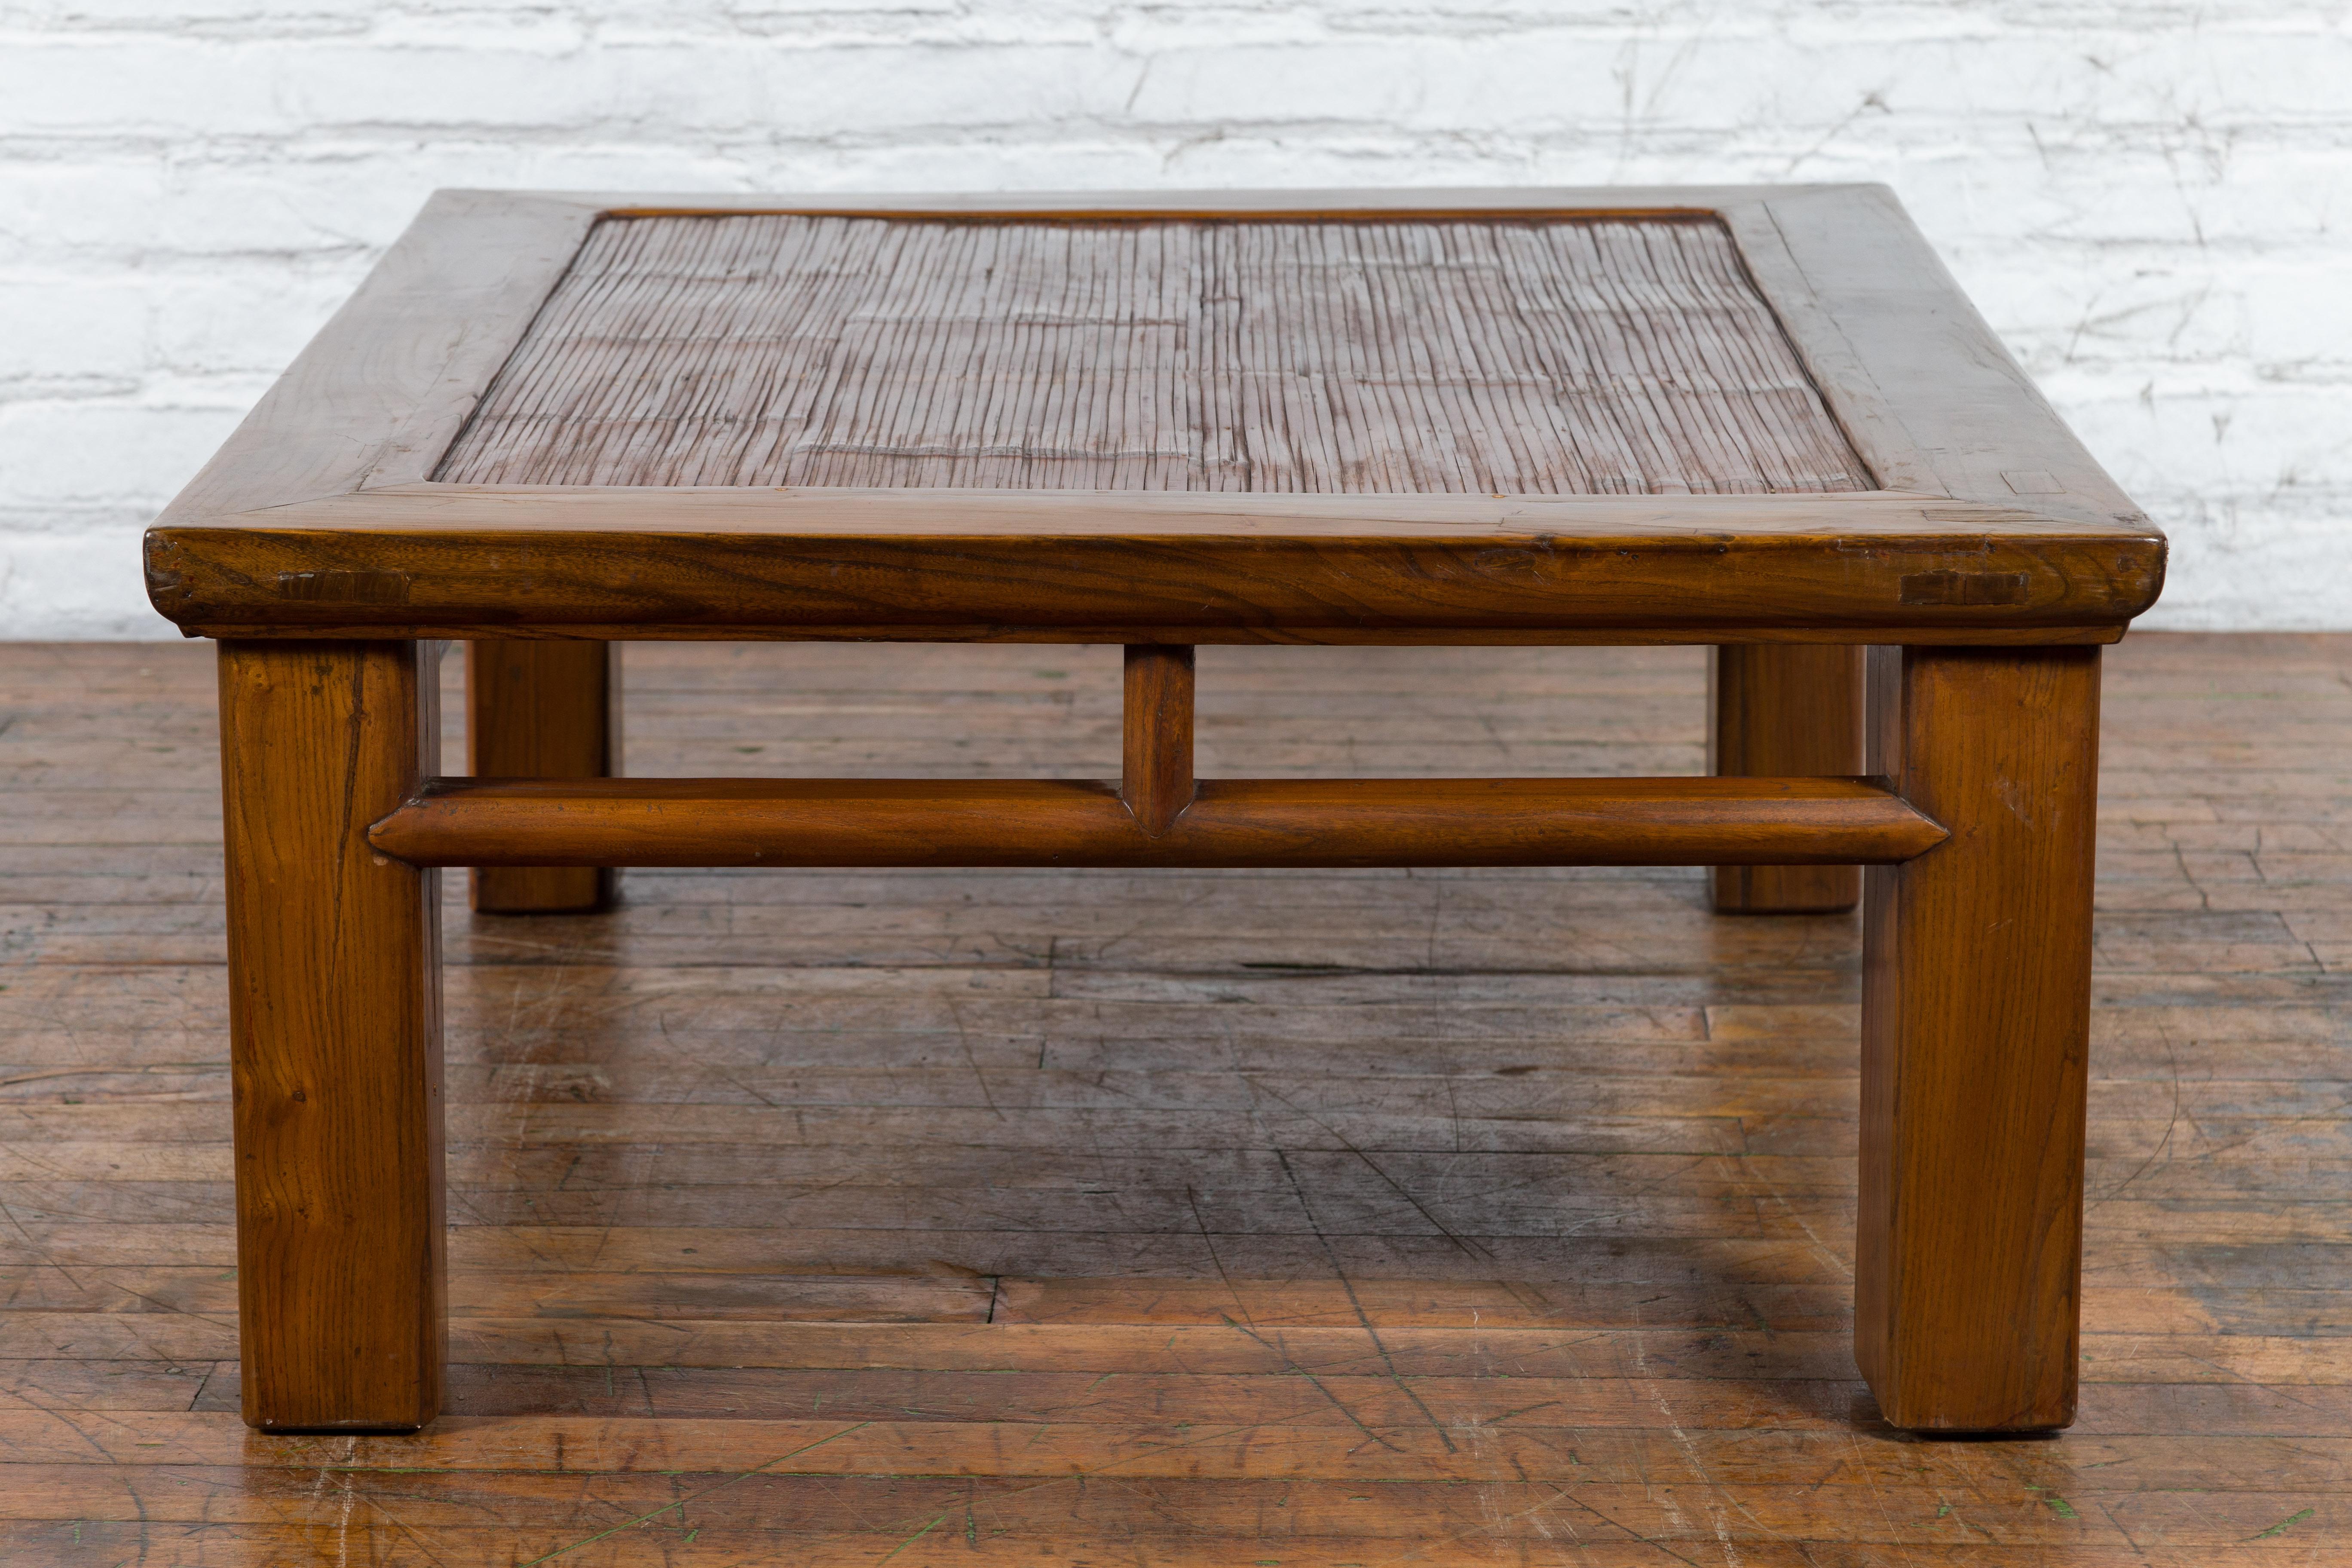 Chinese Late Qing Dynasty Wooden Coffee Table with Bamboo Top and Open Apron For Sale 11